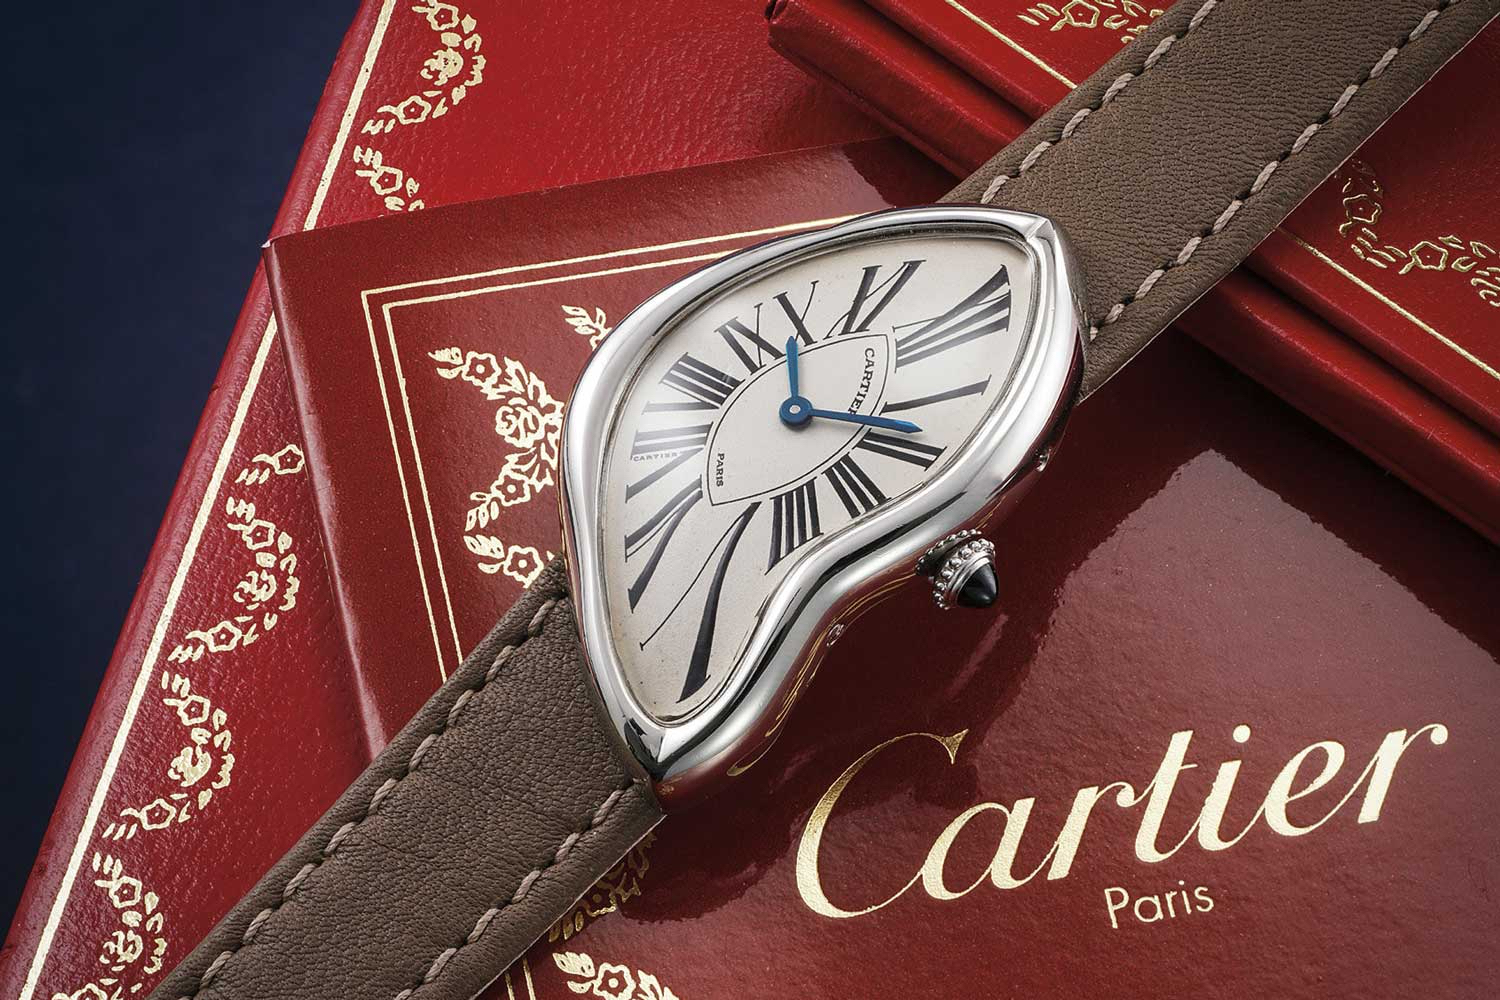 cartier watches prices in bahrain